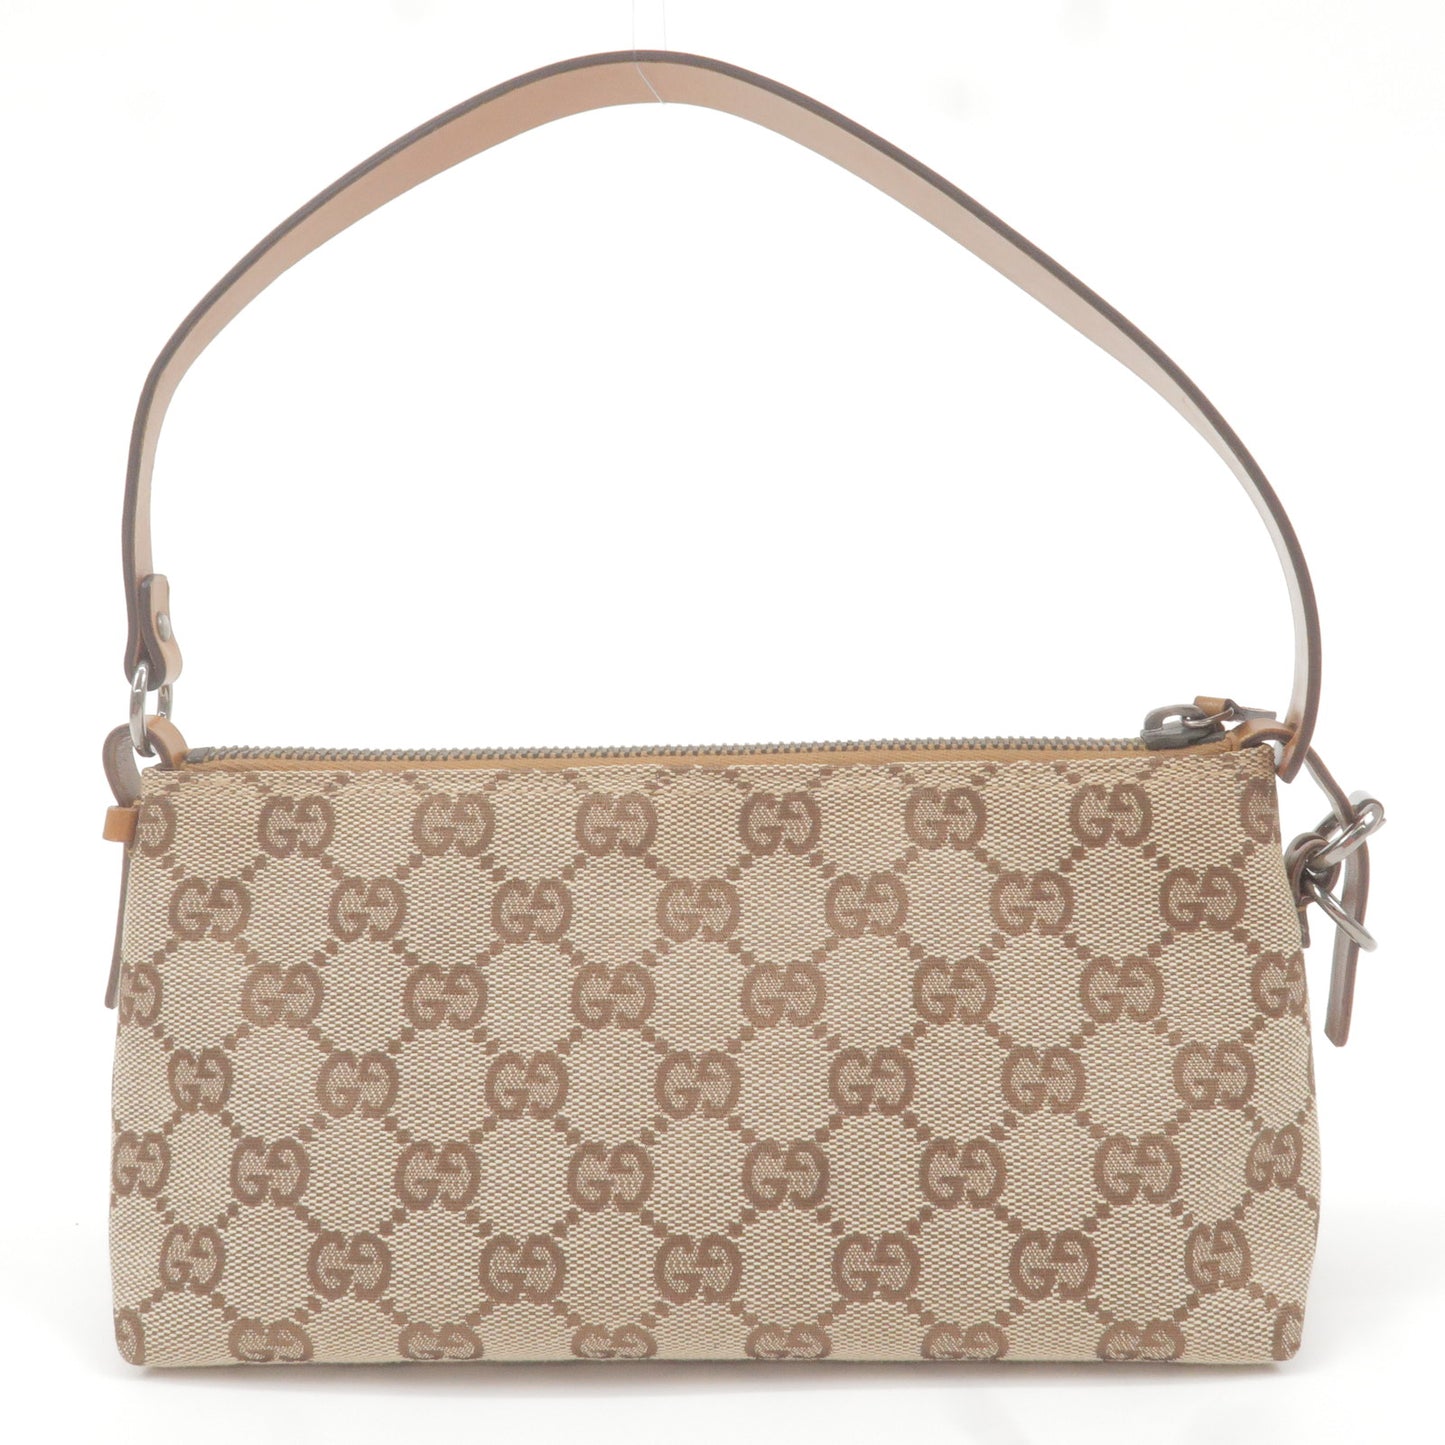 GUCCI-GG-Canvas-Leather-Hand-Bag-Pouch-Beige-Brown-103399 – dct